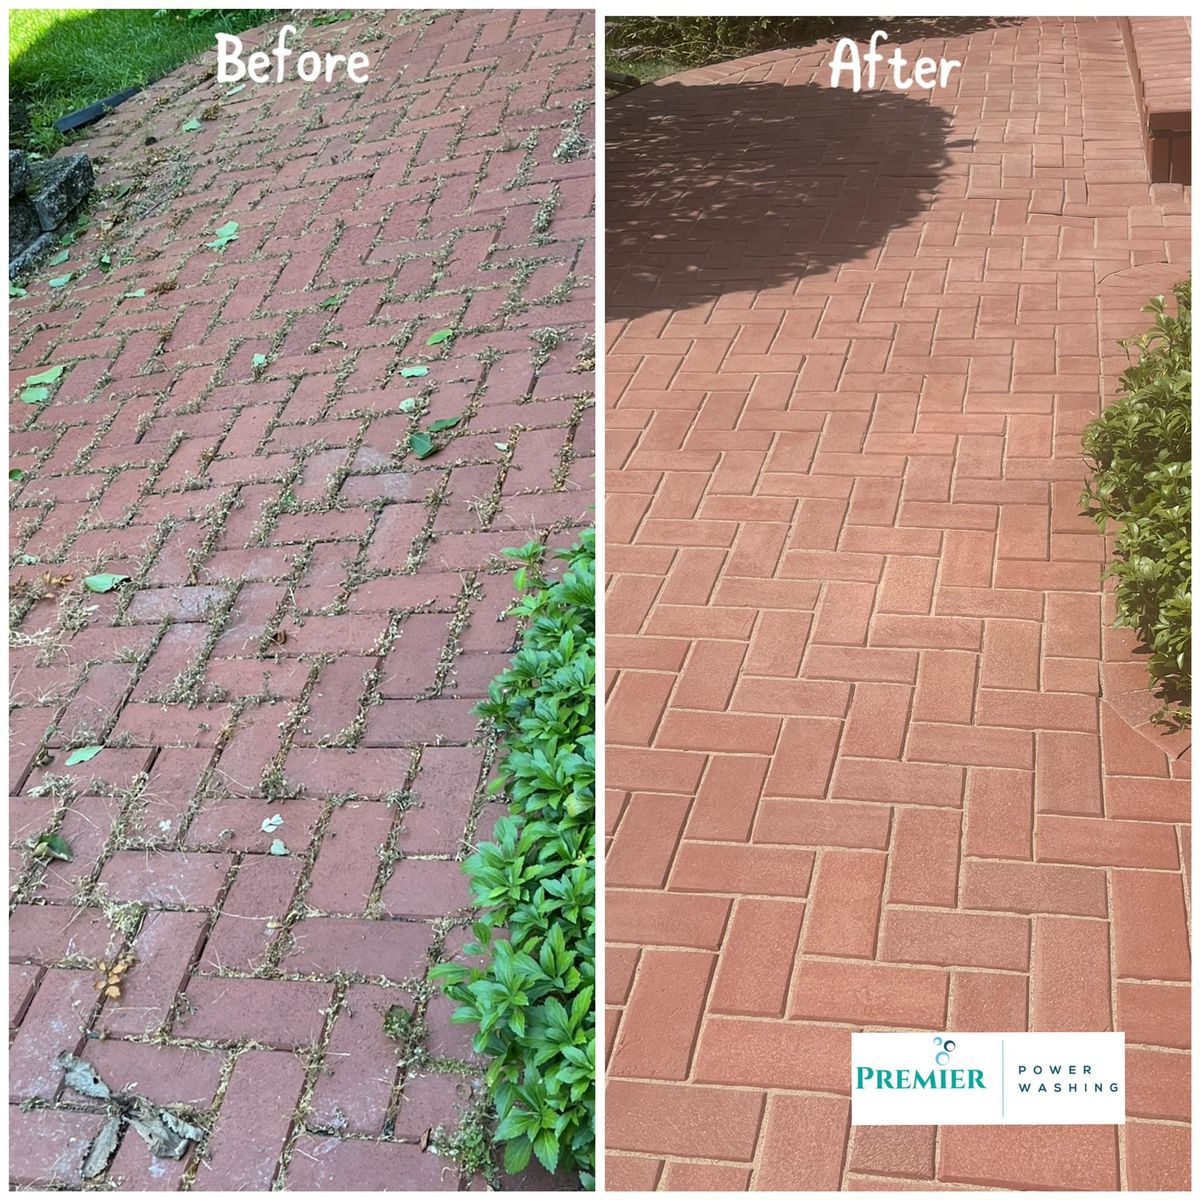 Power Washing for Premier Partners, LLC. in Volo, IL